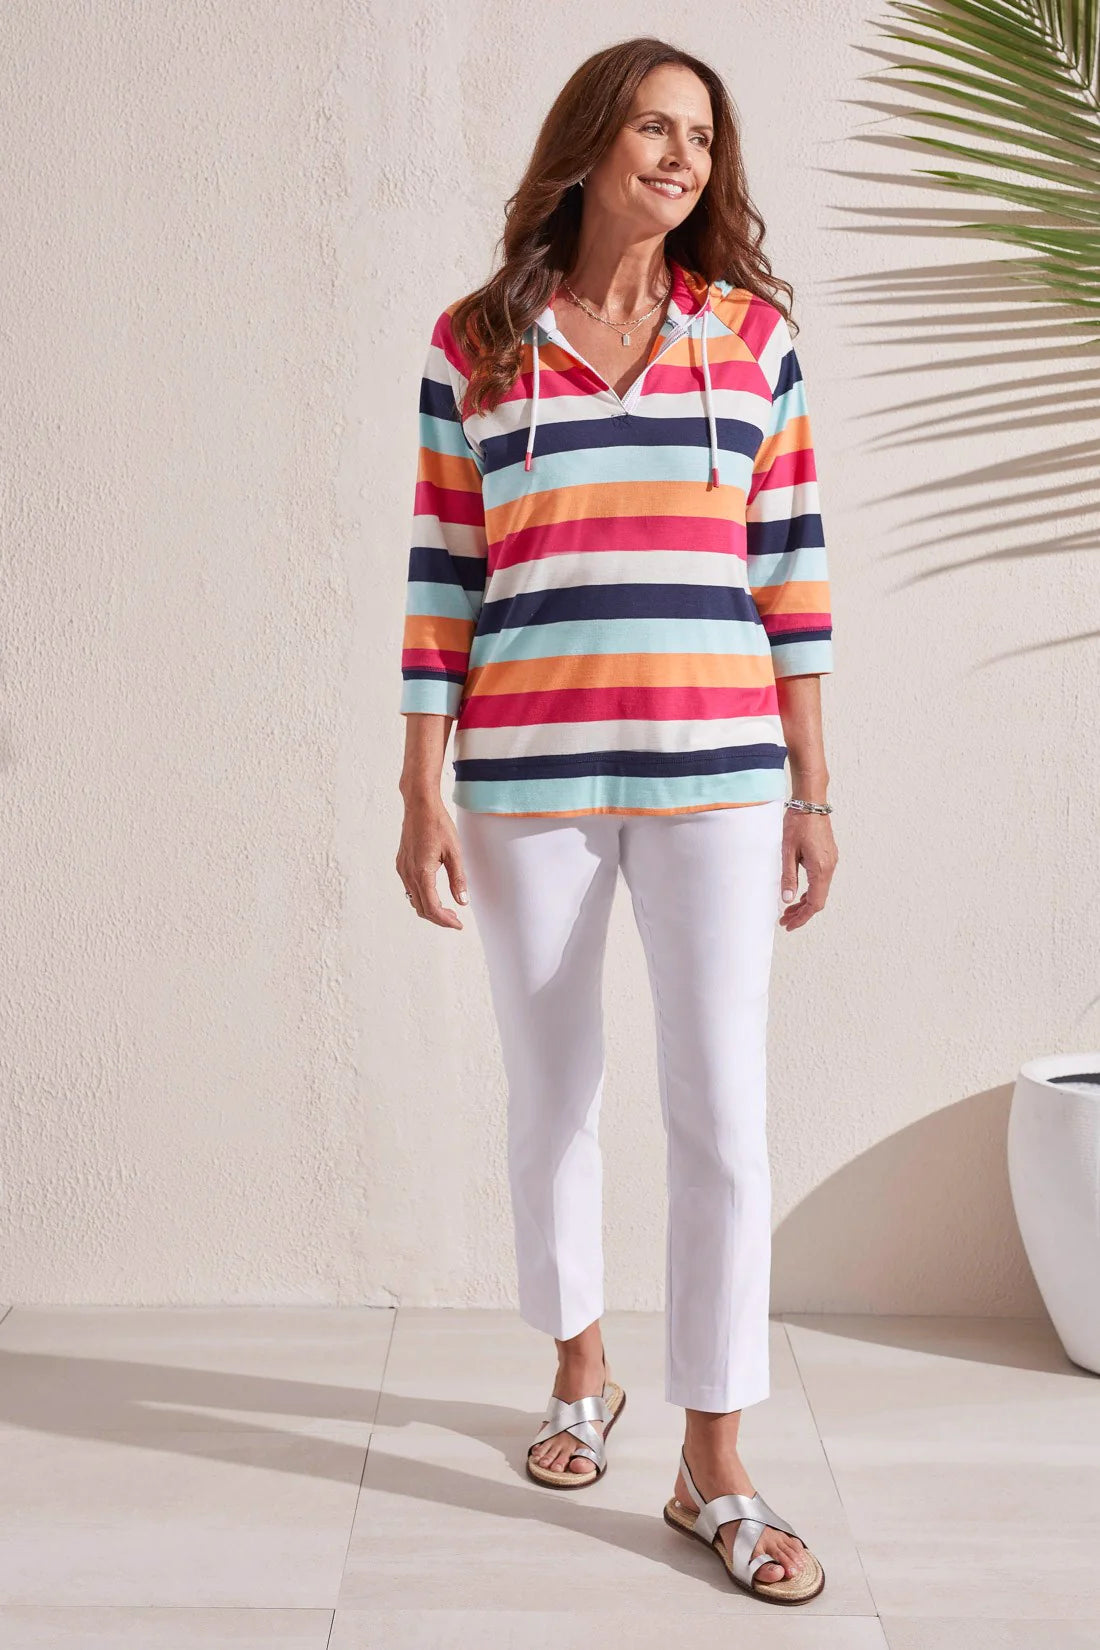 Craving coziness that won't weigh you down? This raglan hoody is ready to check all your boxes with an airy notch neckline, three-quarter sleeves, flattering shirttail hem, and fabric patterned with colourful stripes.